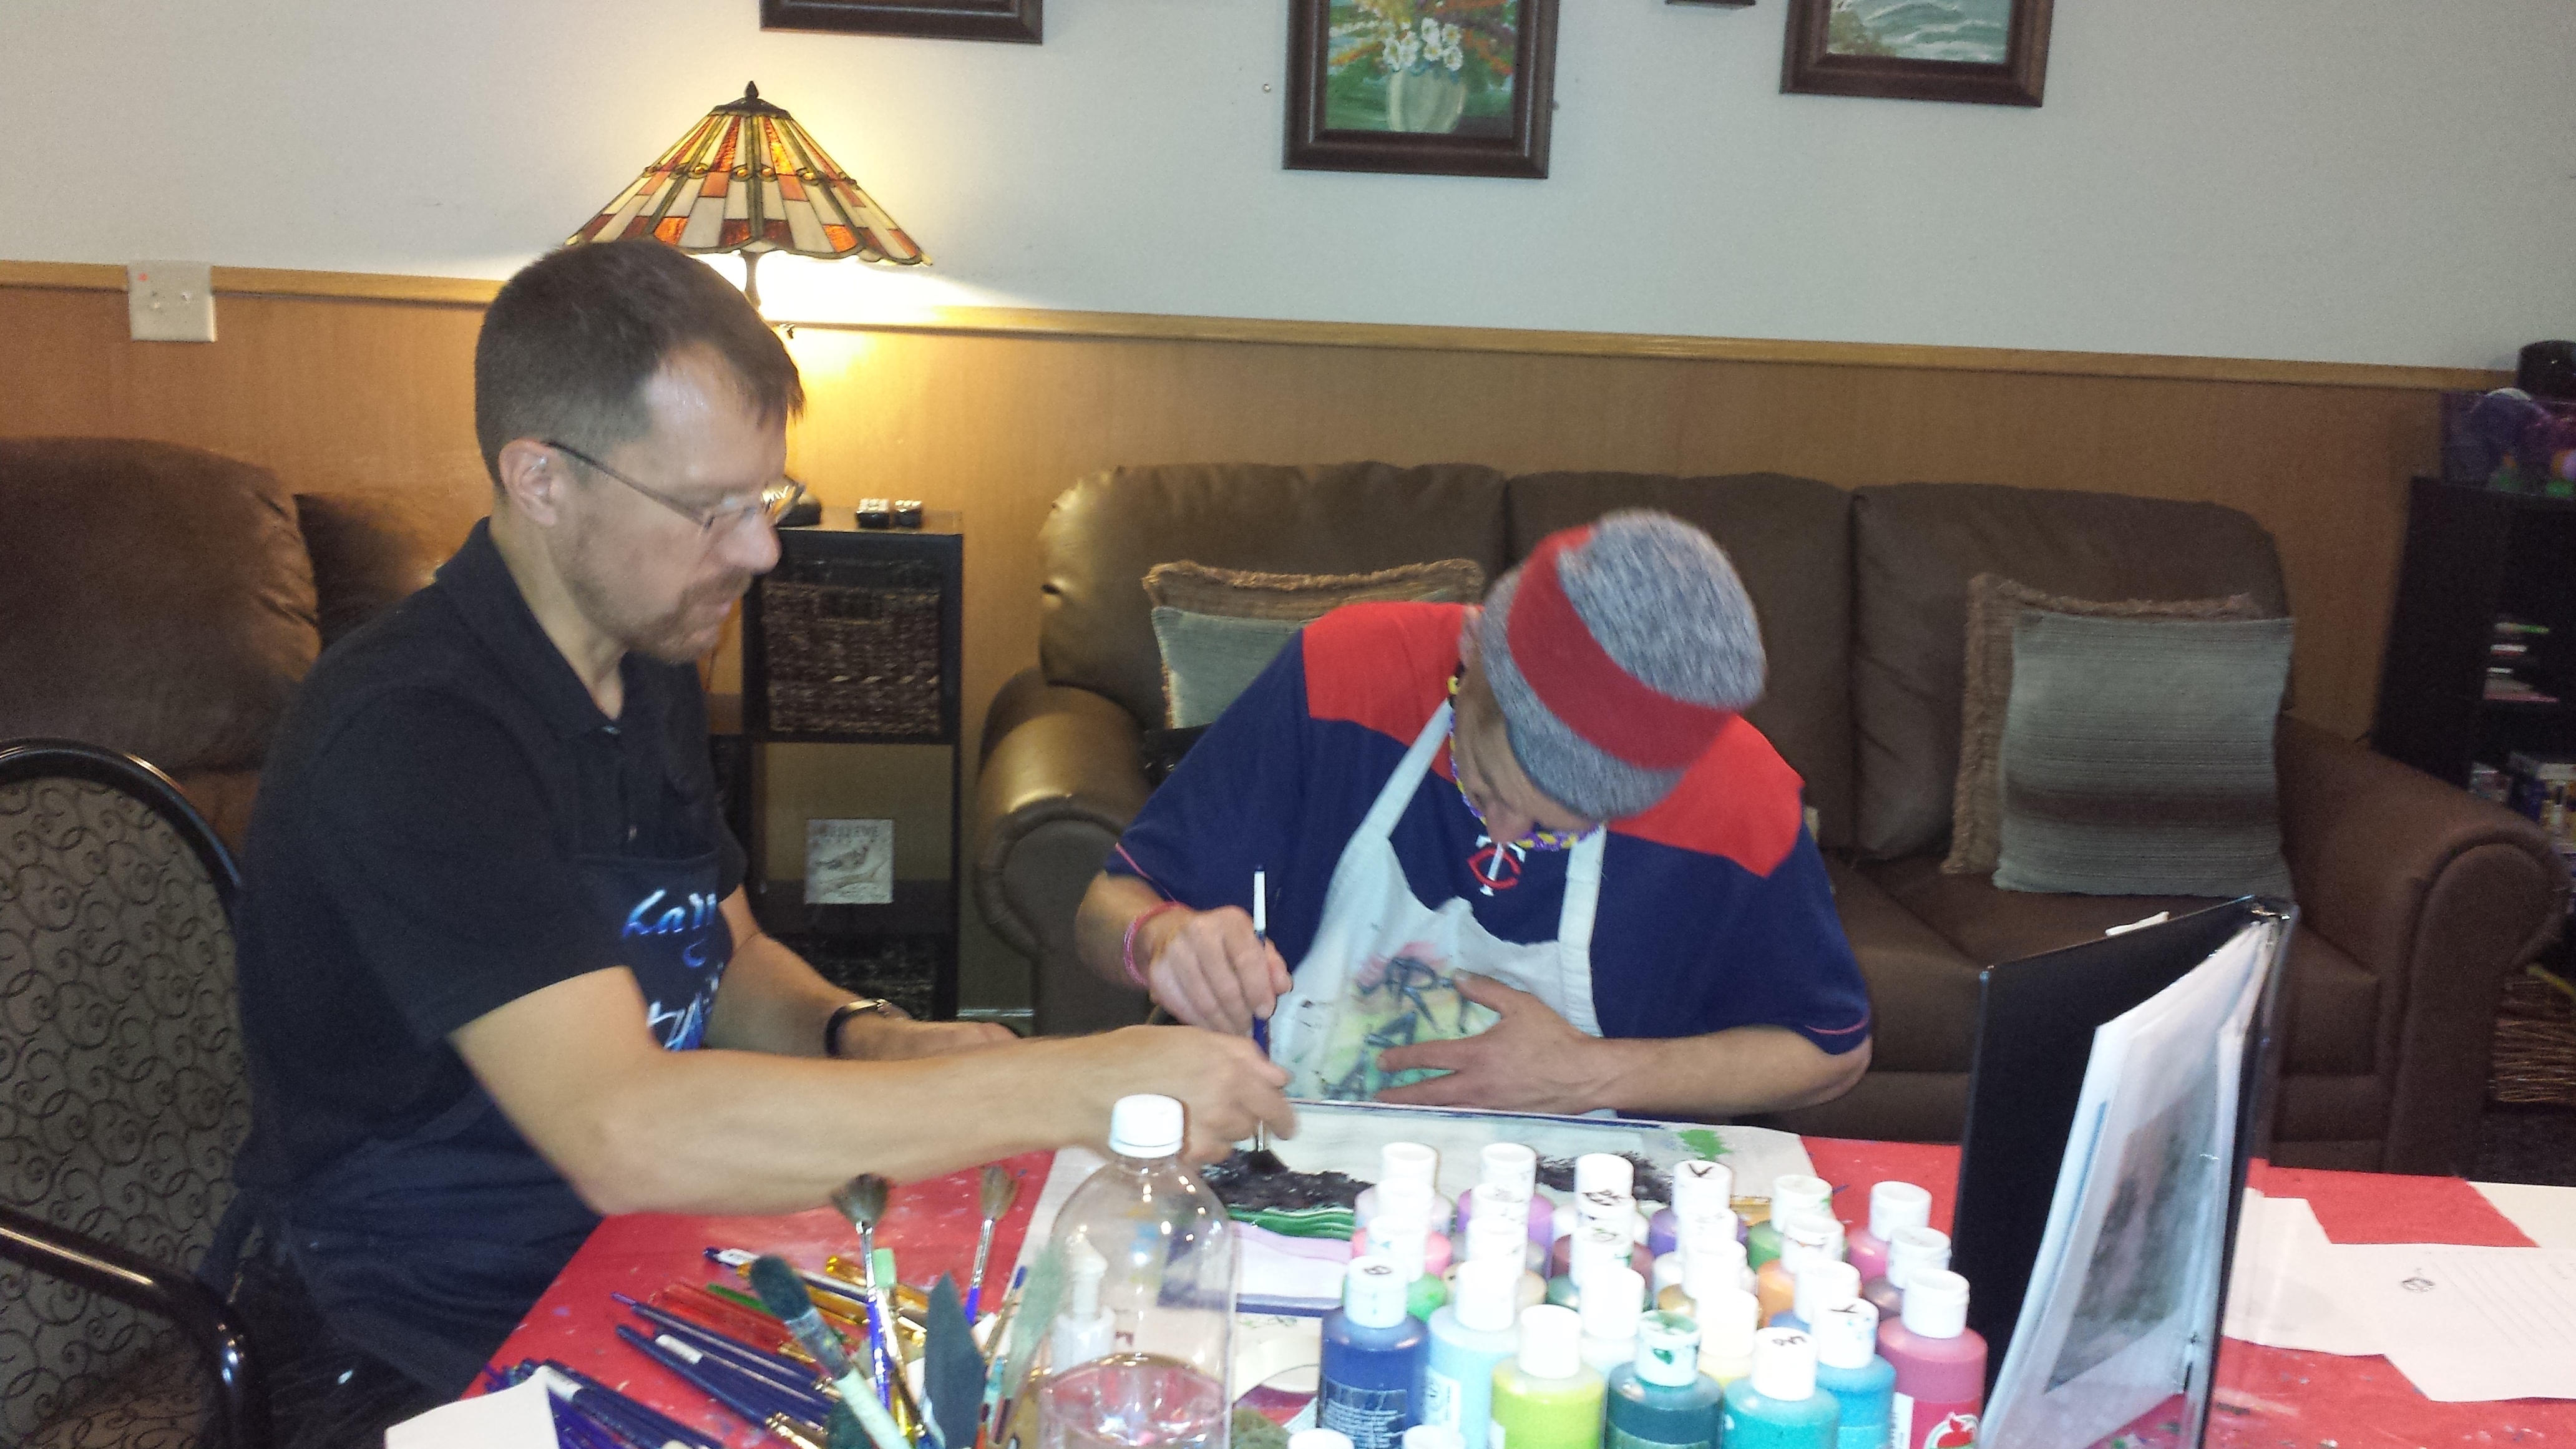 Marc painting with Larry Homan the art instructor